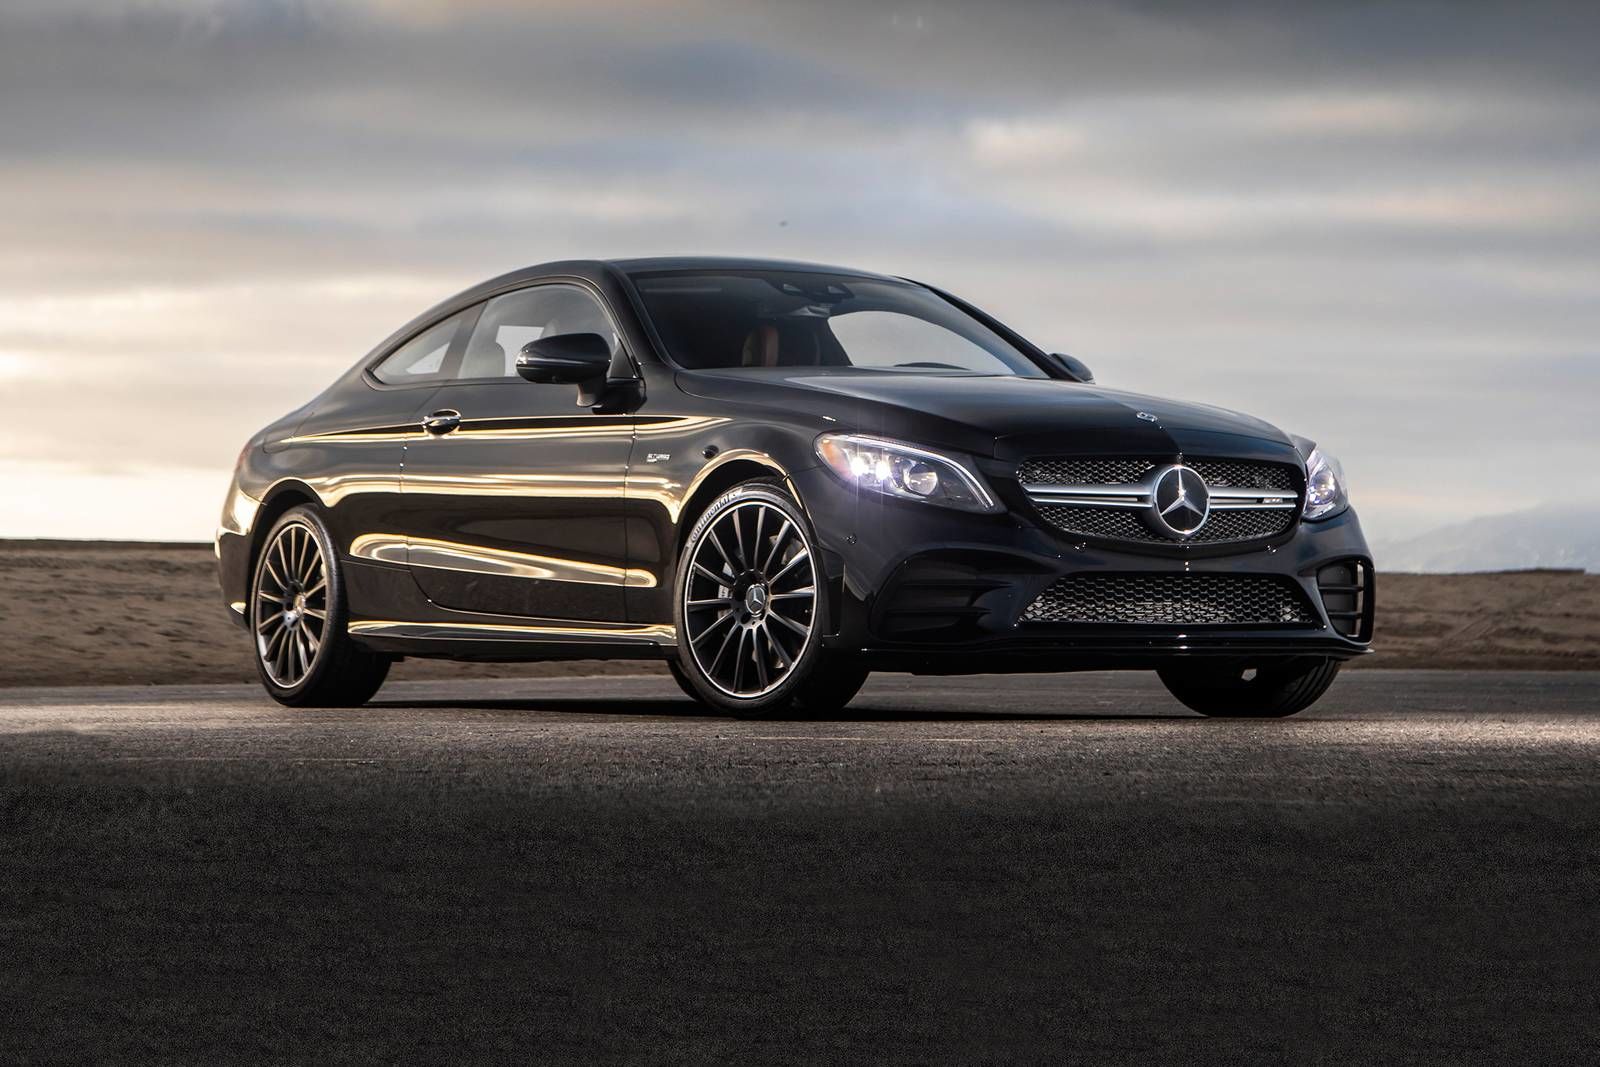 The Mercedes-Benz C-Class Coupe is a Coupe Ahead of the Rest